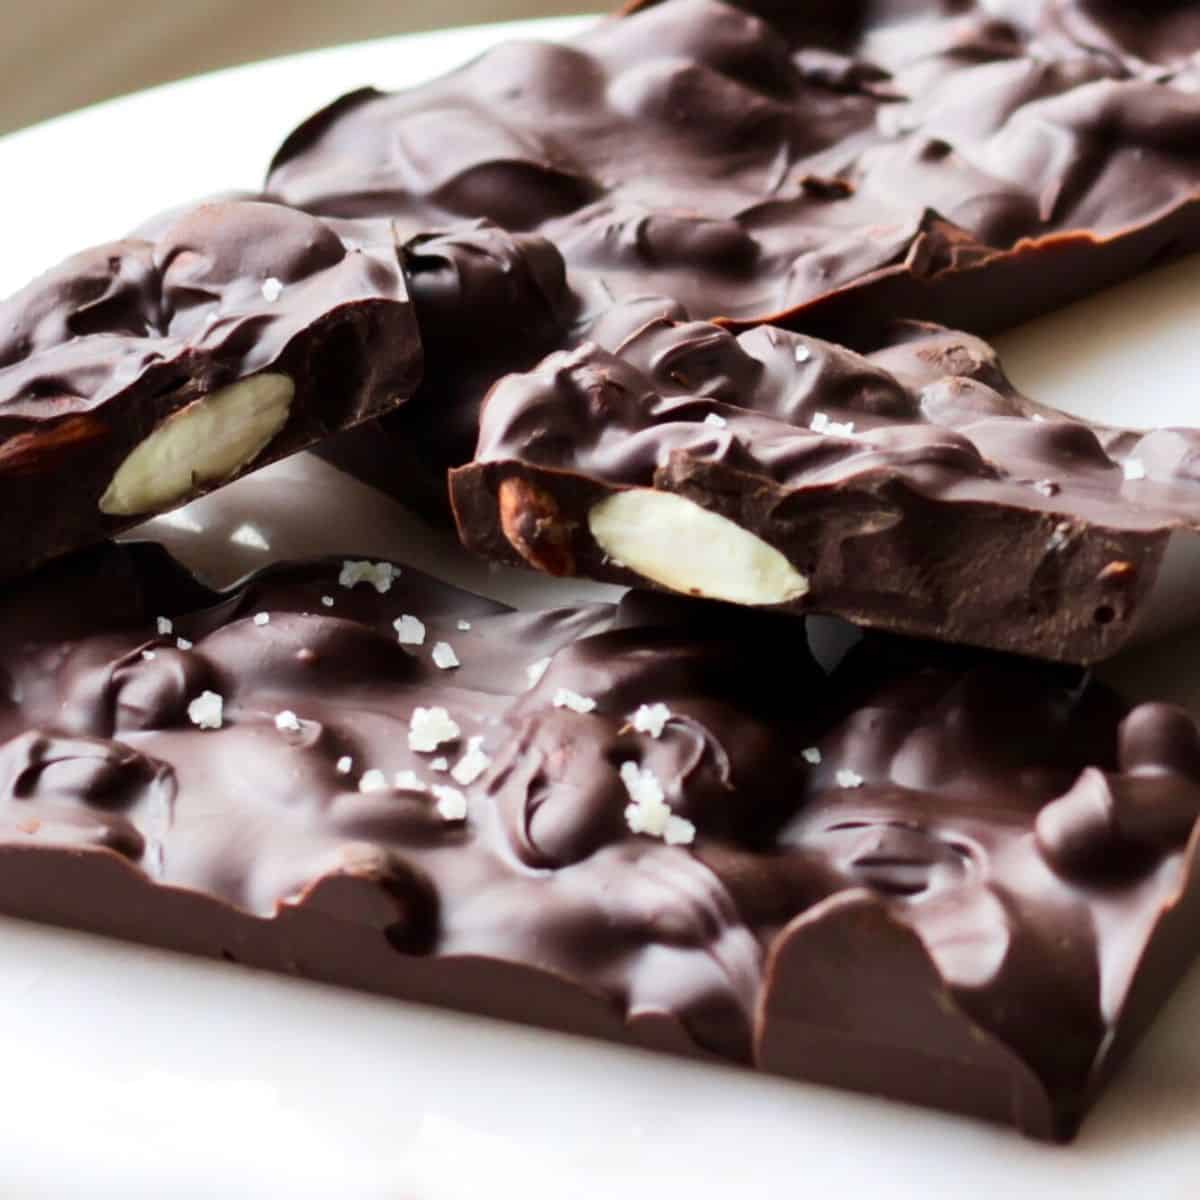 closeup of pieces of chocolate bar with pieces of almond and salt sprinkled on topk